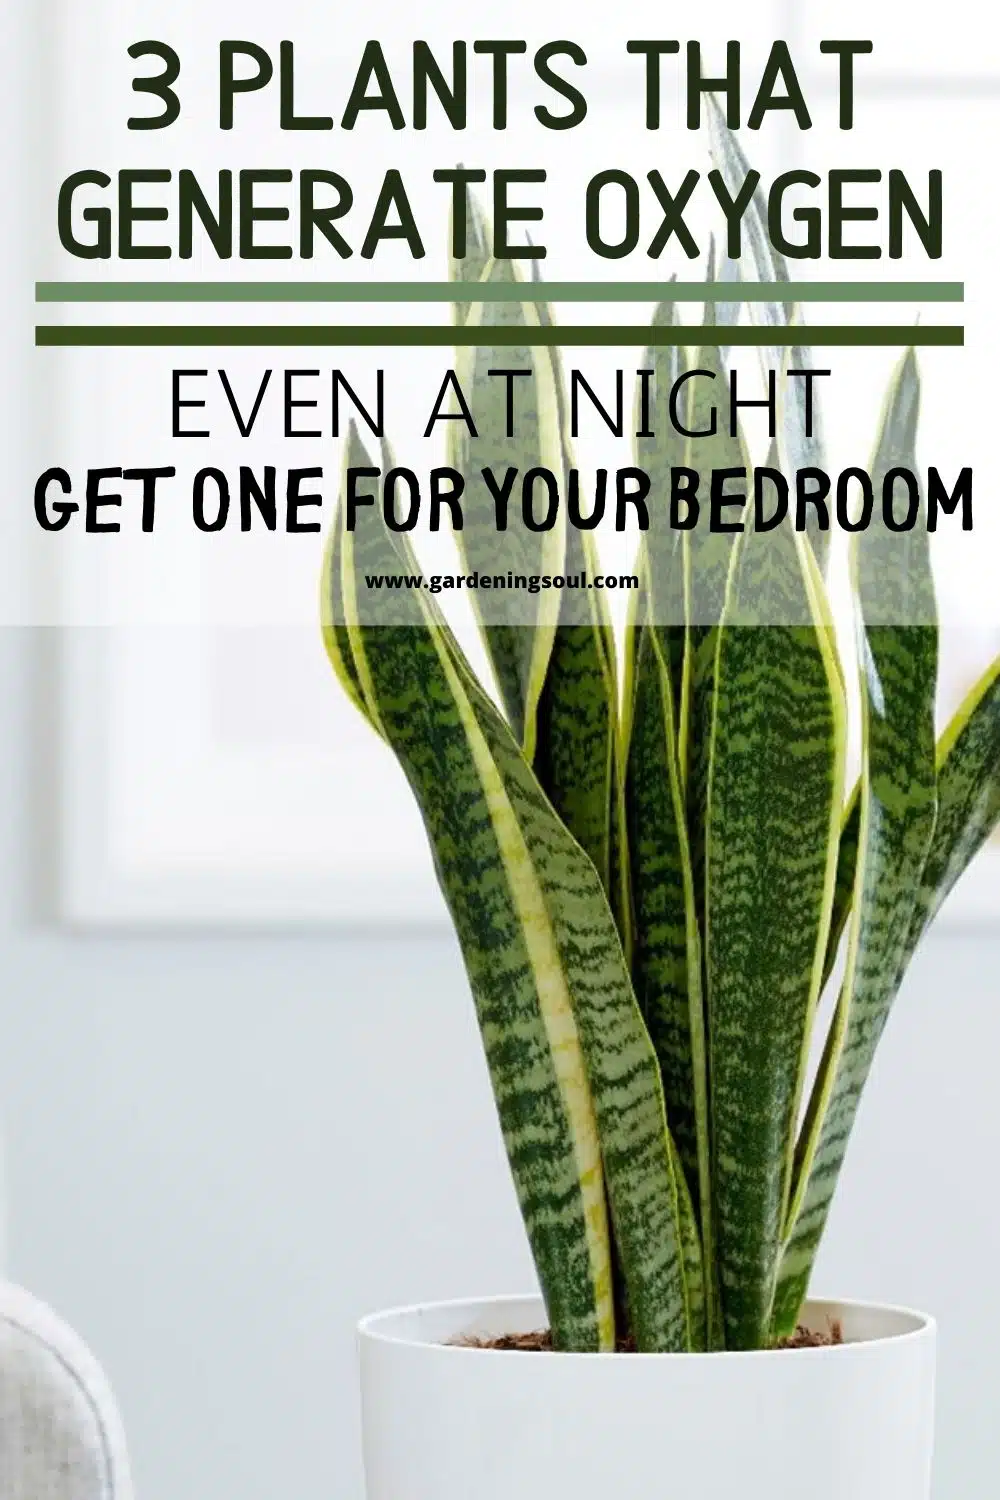 3 Plants That Generate Oxygen Even At Night Get One For Your Bedroom